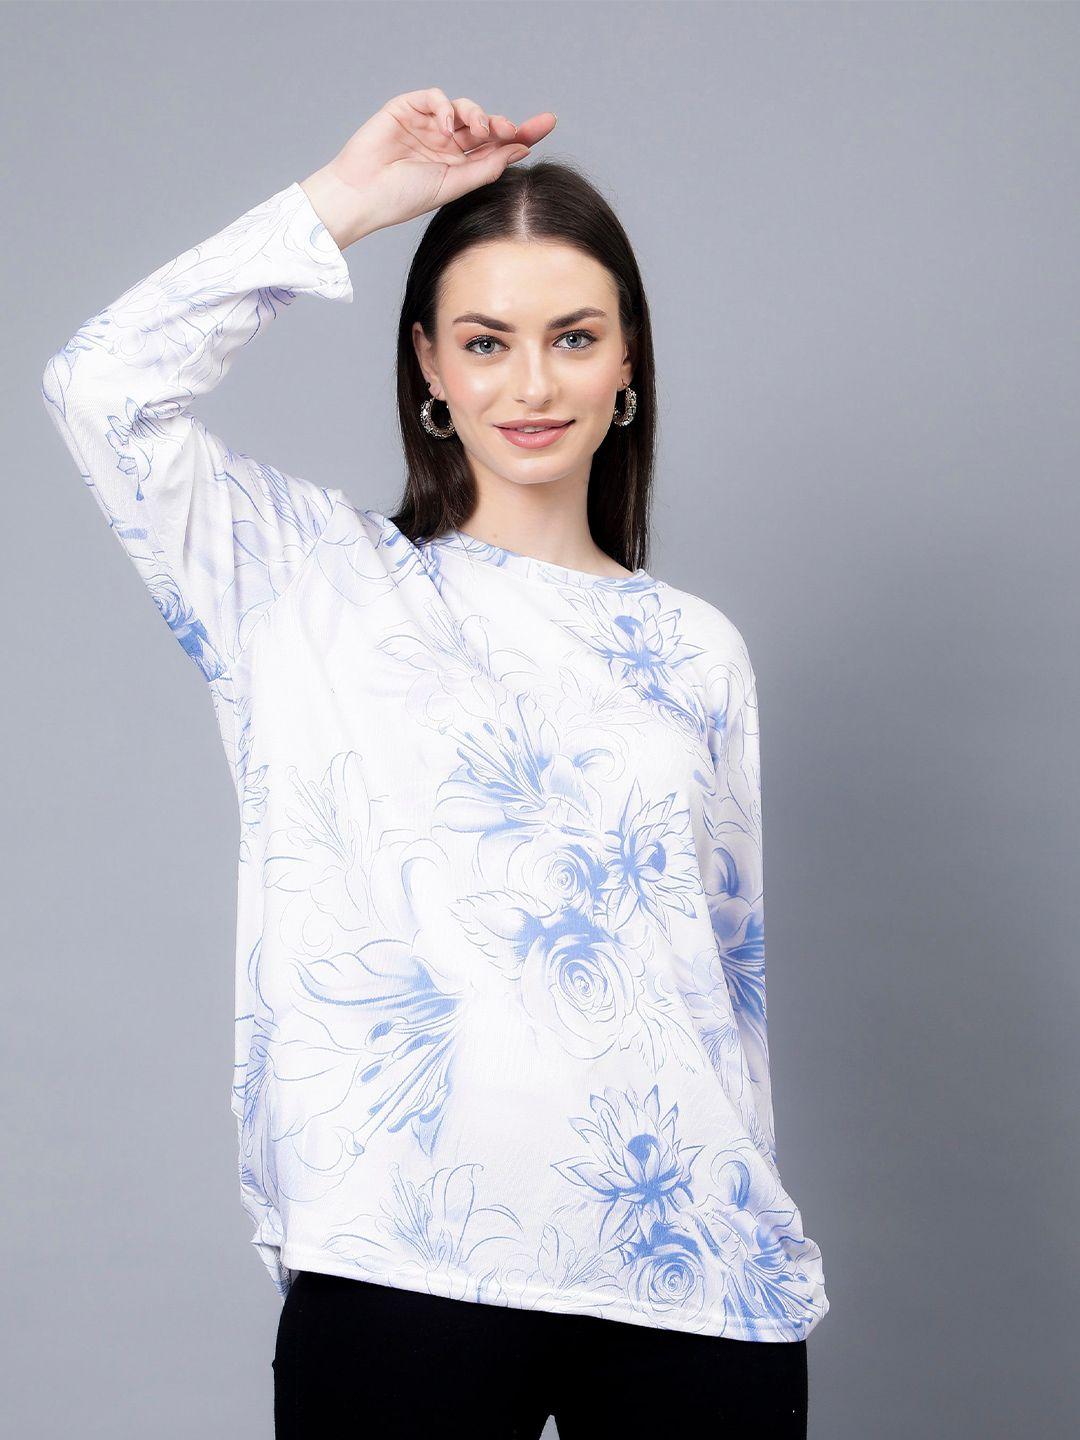 albion floral printed round neck boxy top